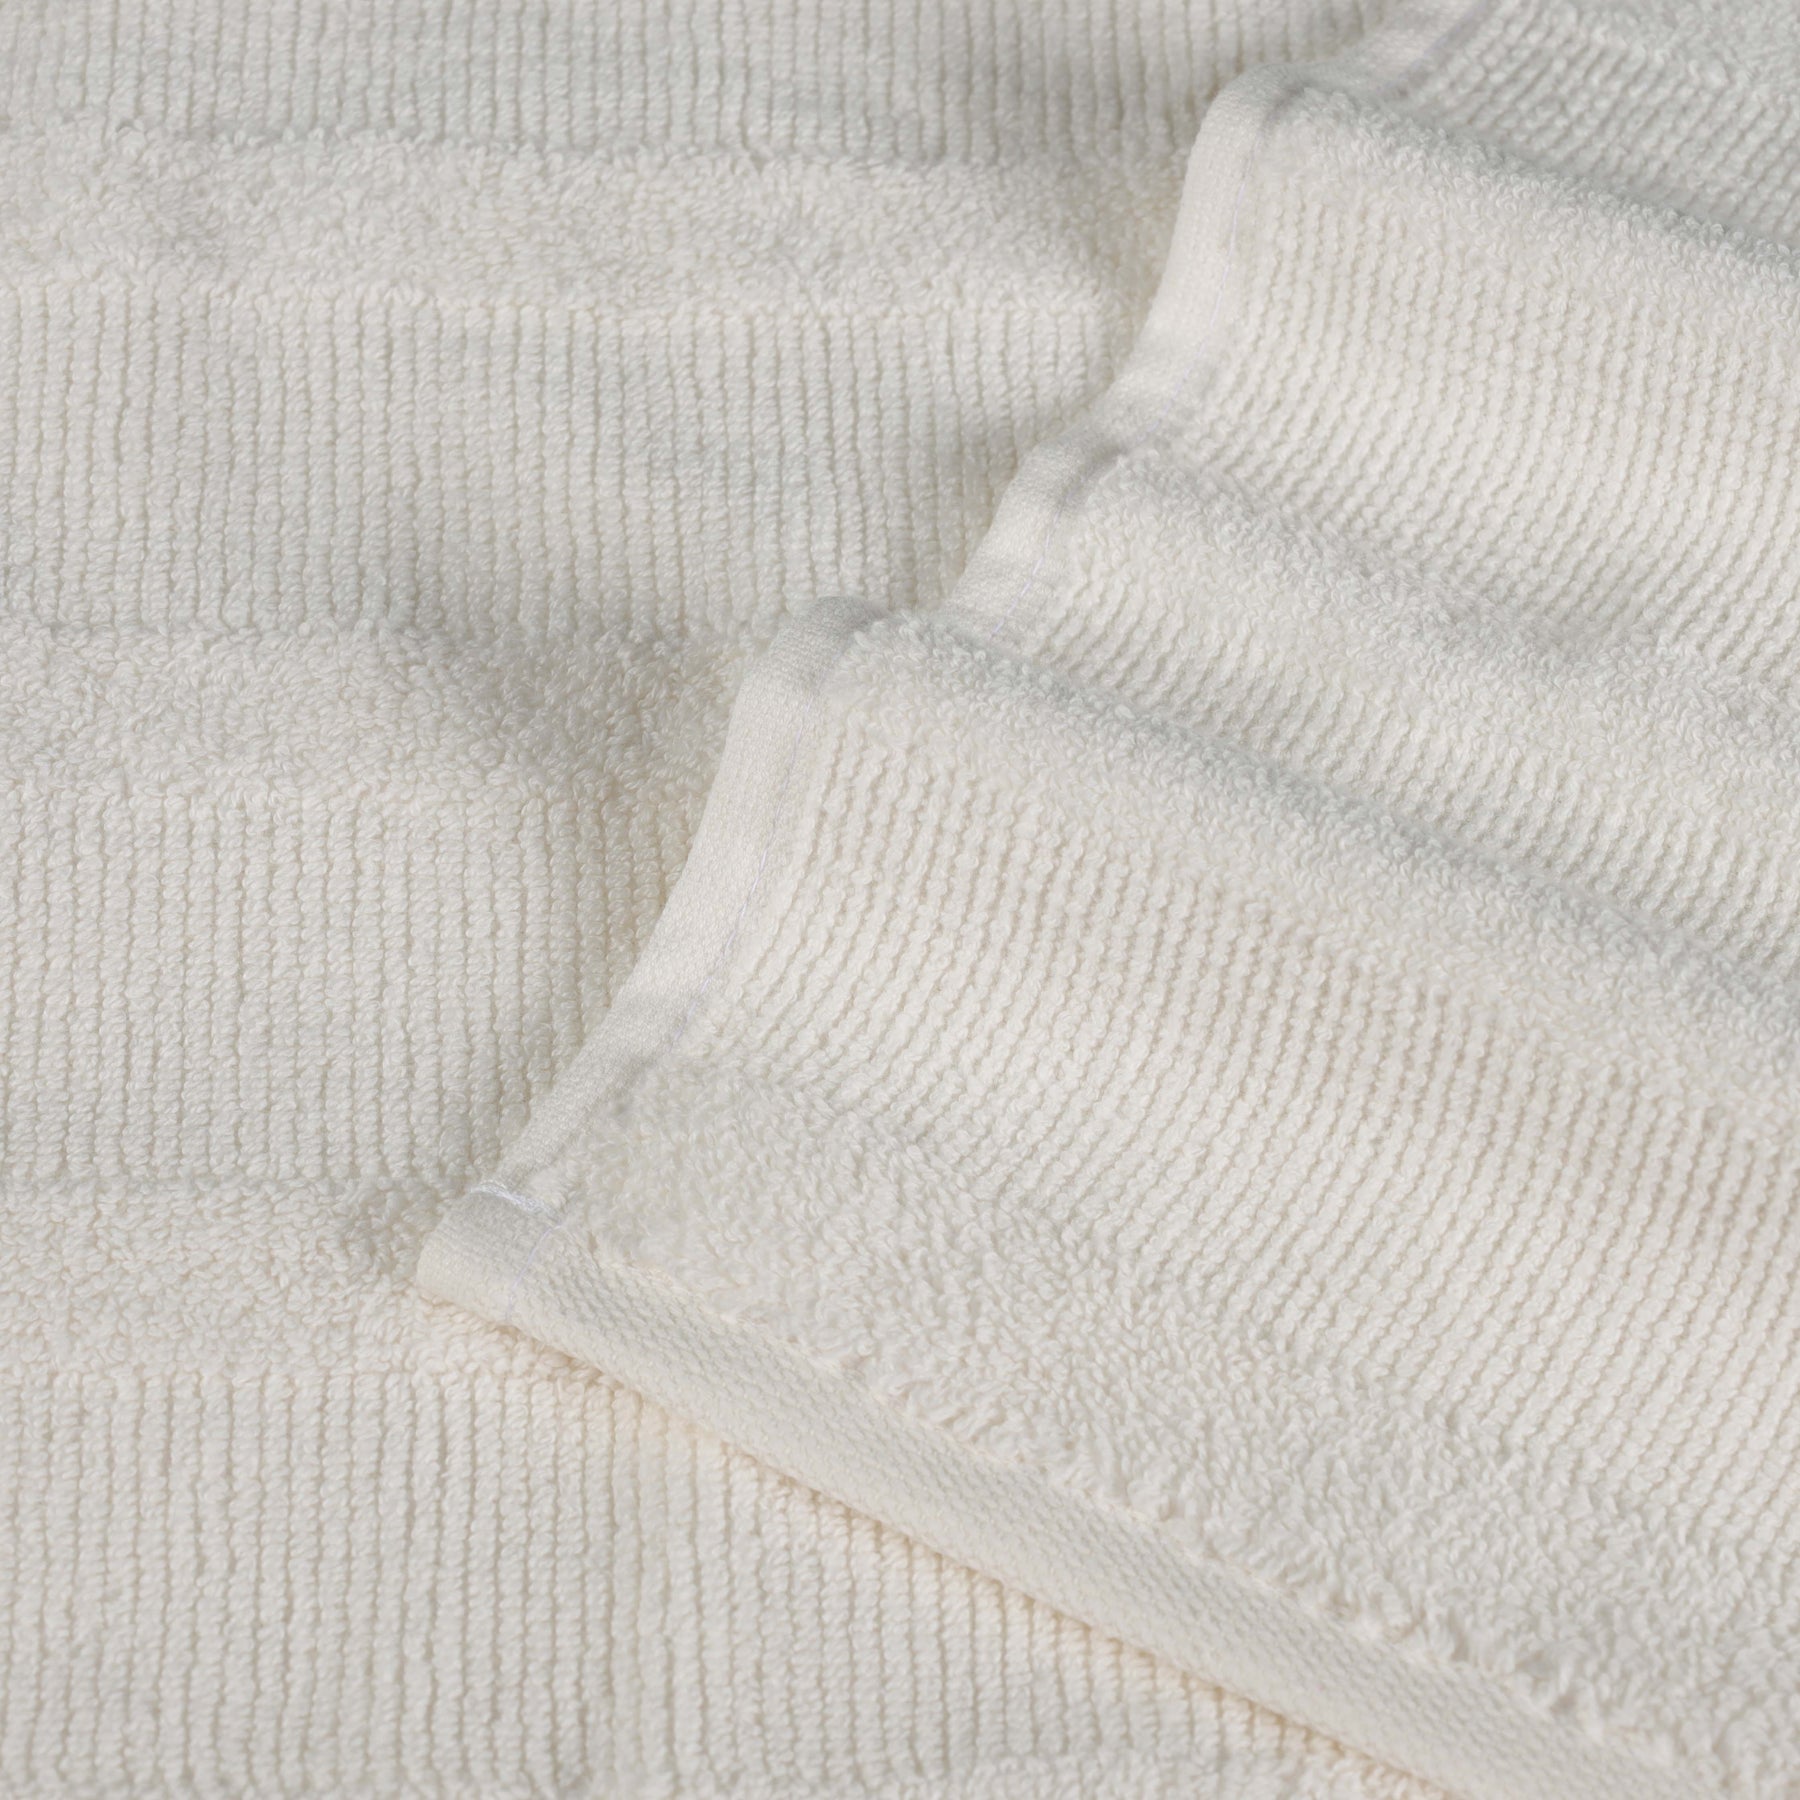 Roma Cotton Ribbed Textured Soft Highly Absorbent Hand Towel - Ivory